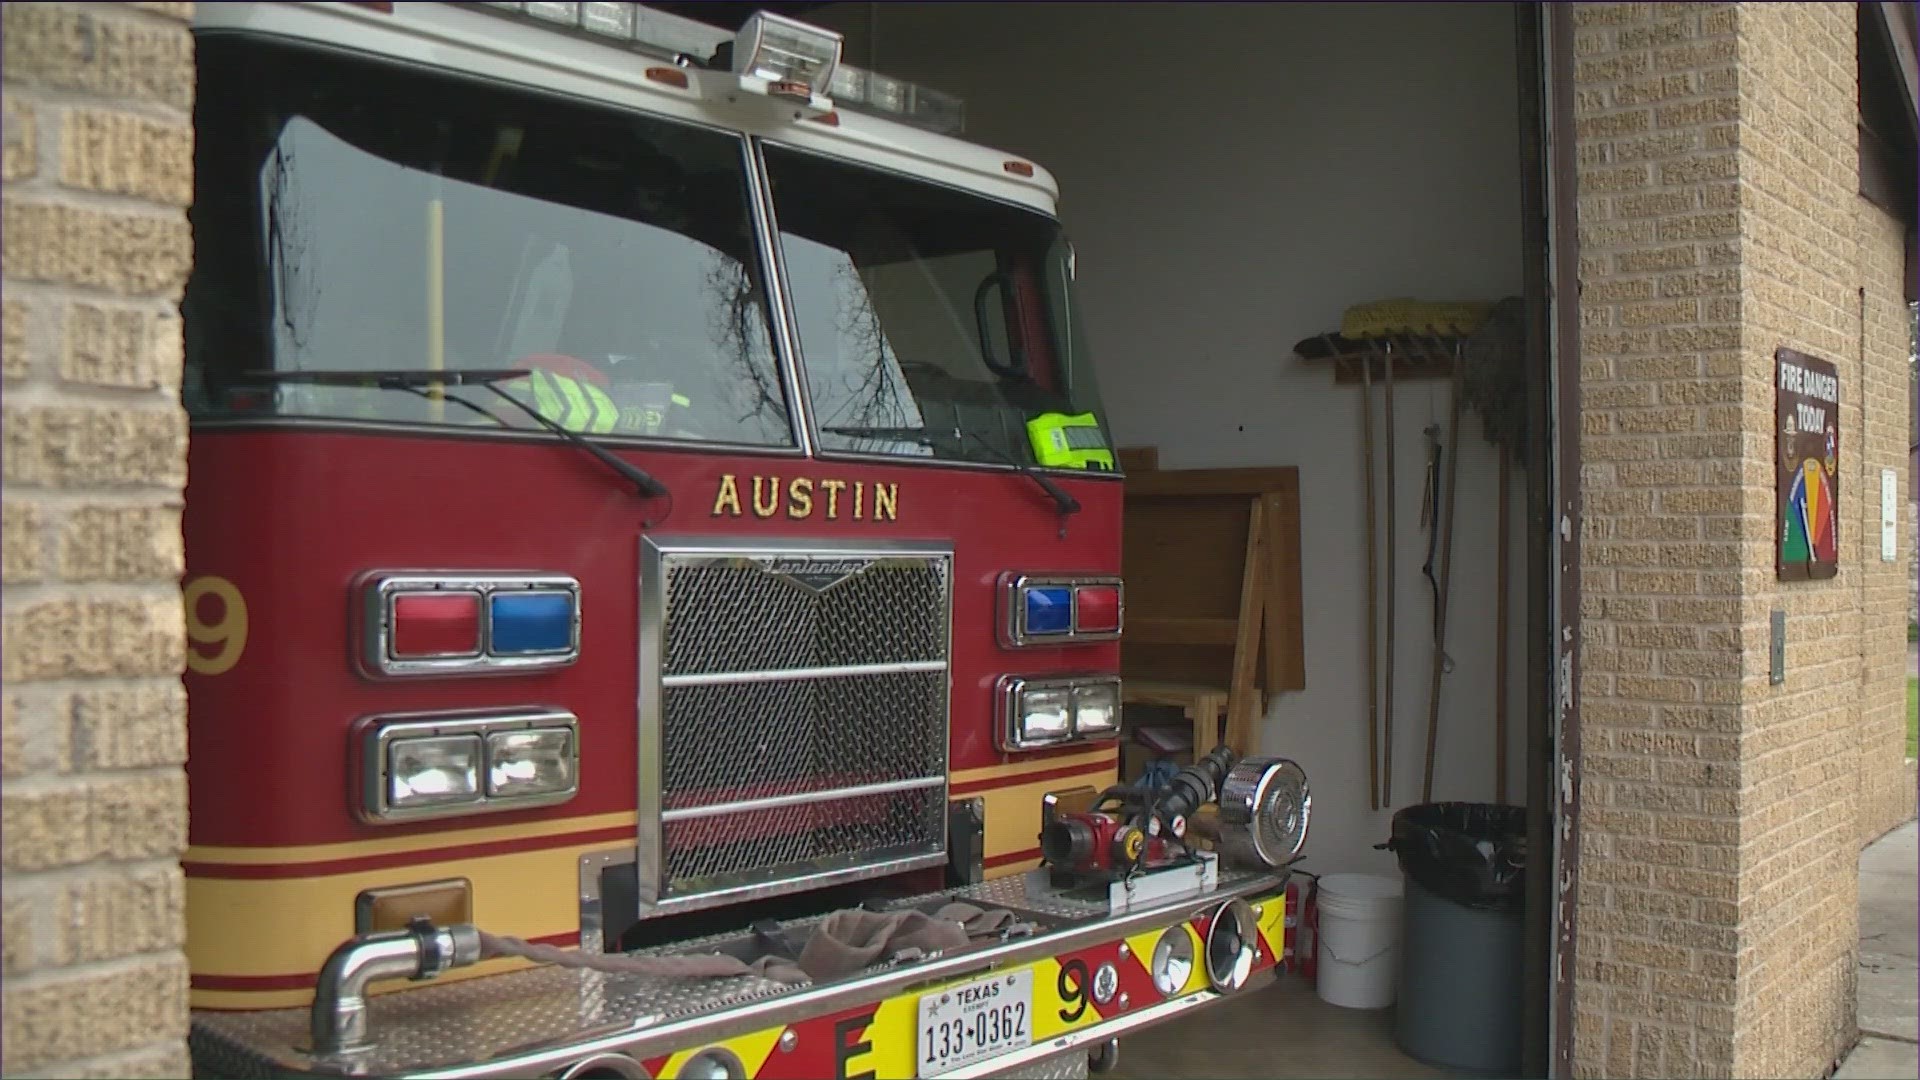 A City memo claims that leaders offered a wage package that "keeps Austin firefighters the best paid in Texas," but the president of the union claims it isn't enough